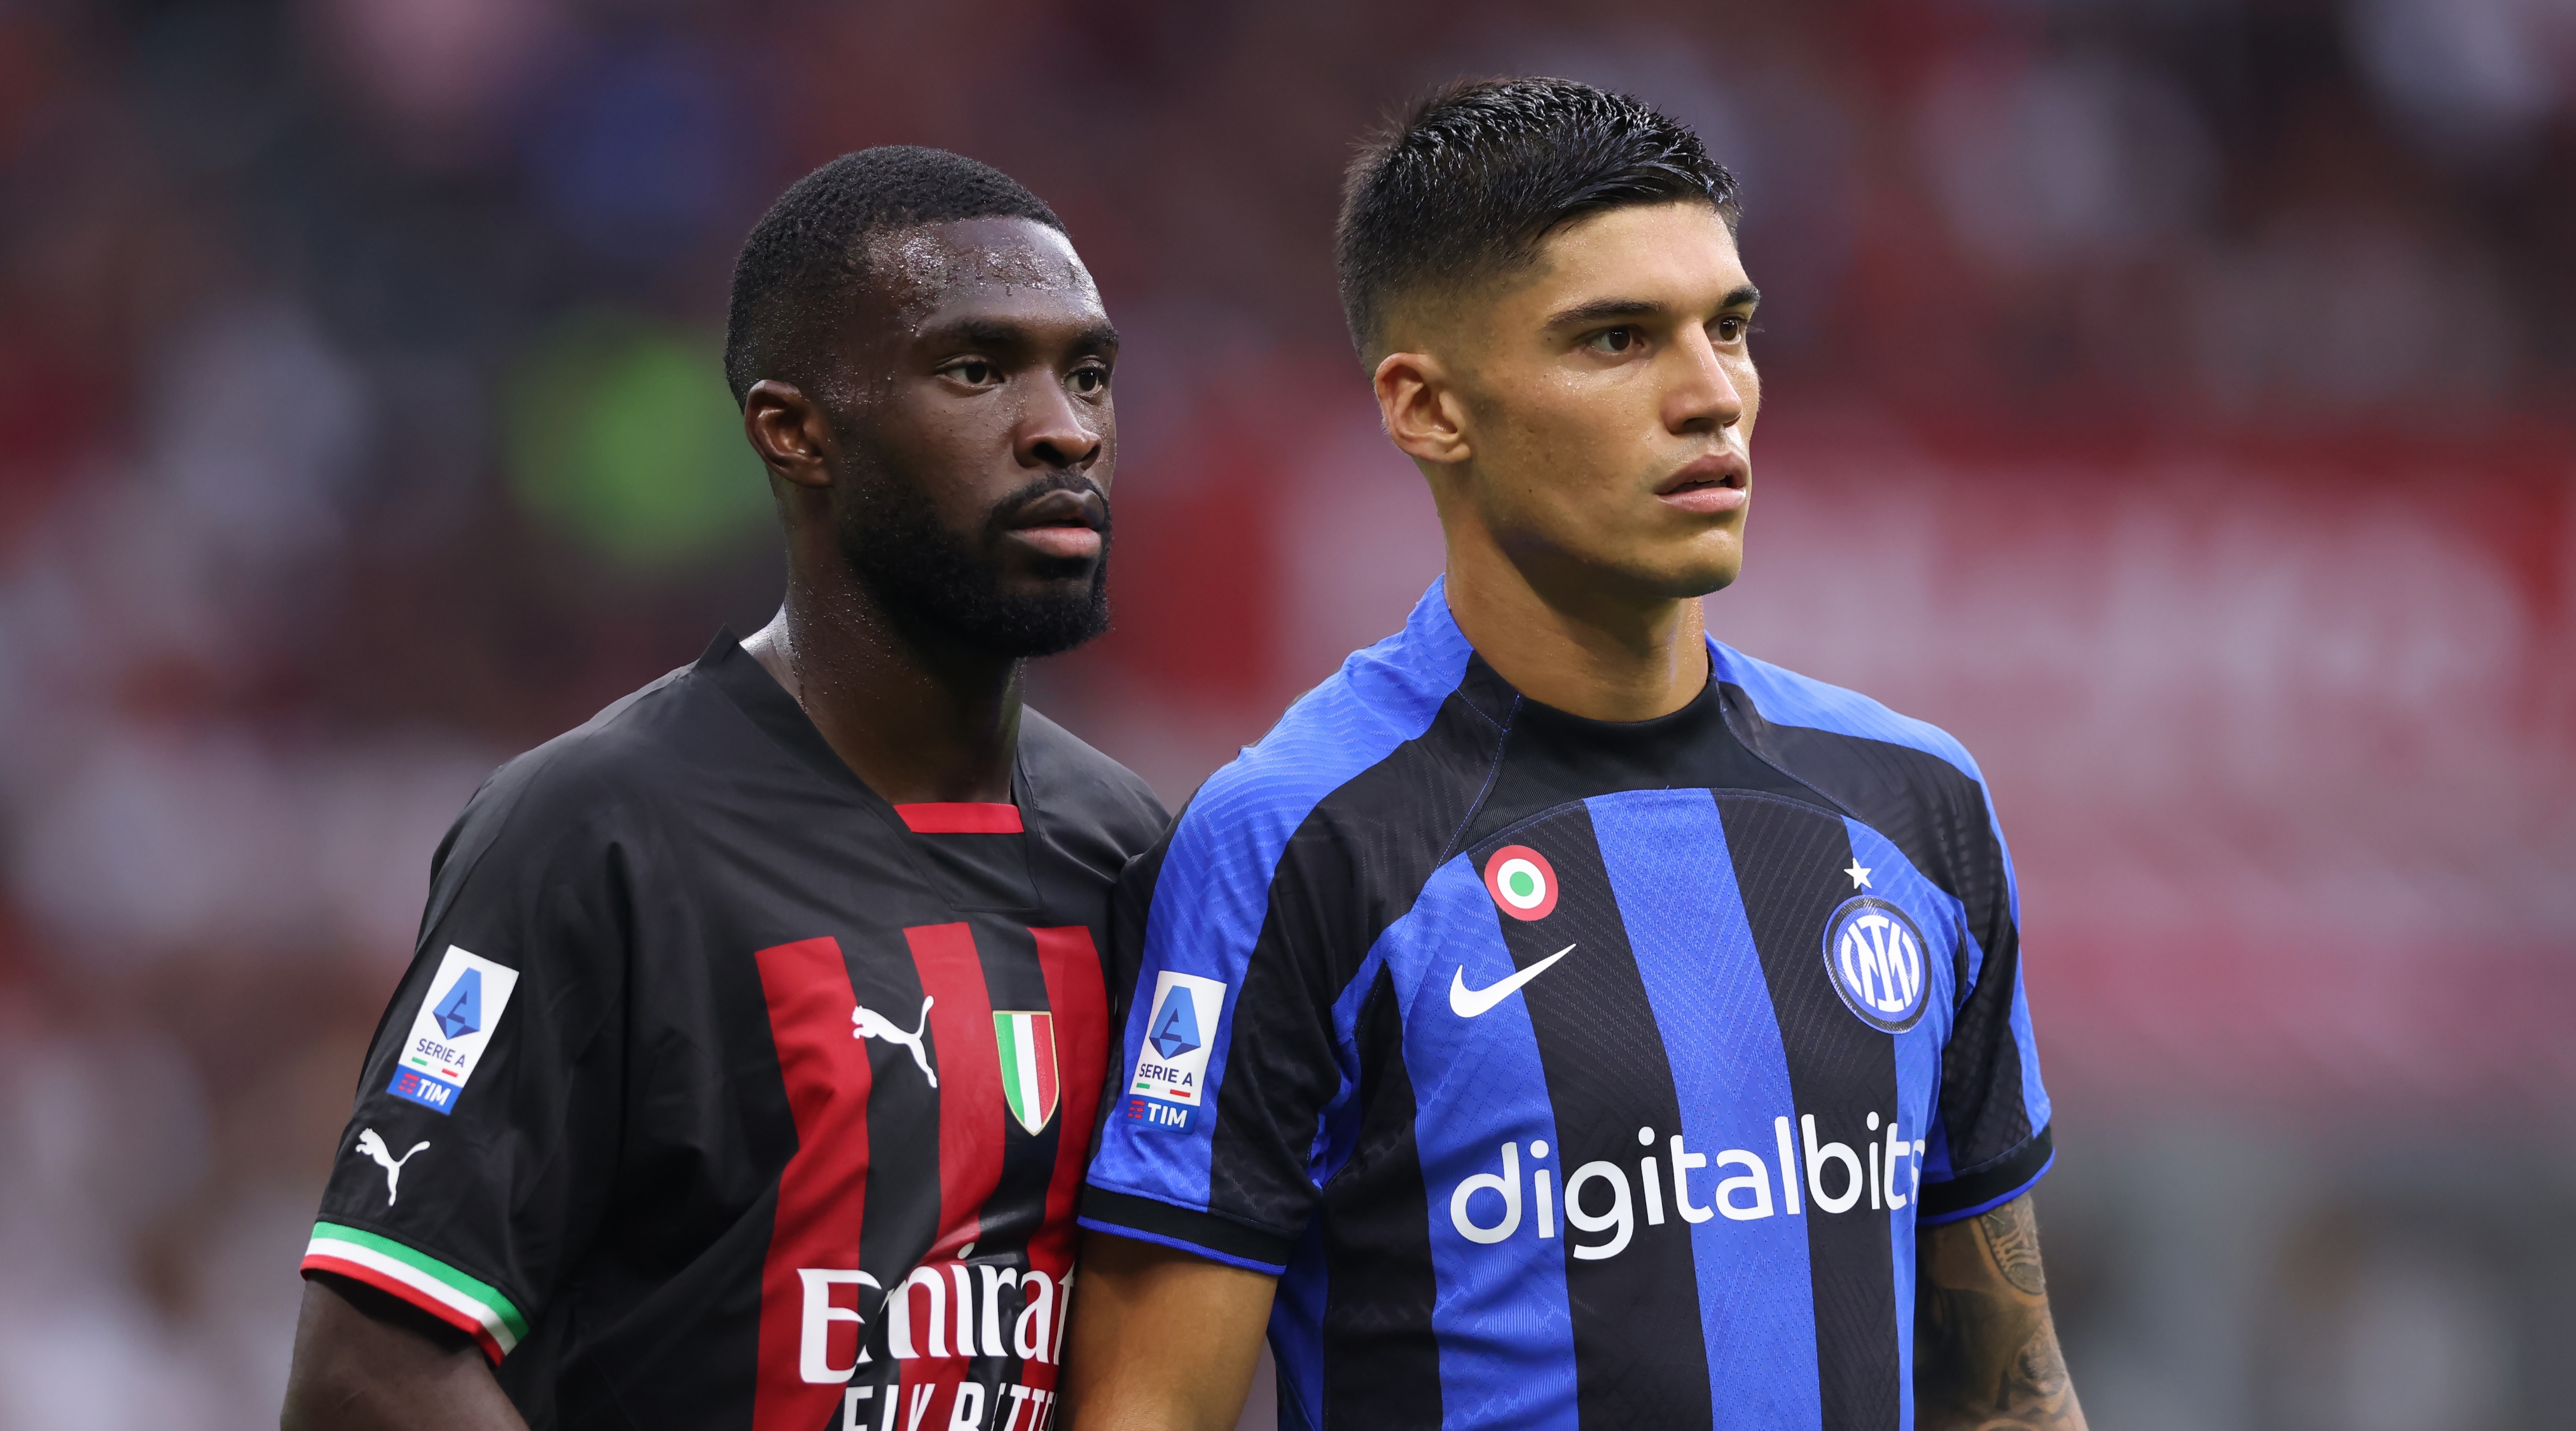 surfen eenzaam Eed AC Milan vs Inter Milan live stream, match preview, team news and kick-off  time for this Italian Super Cup match | FourFourTwo